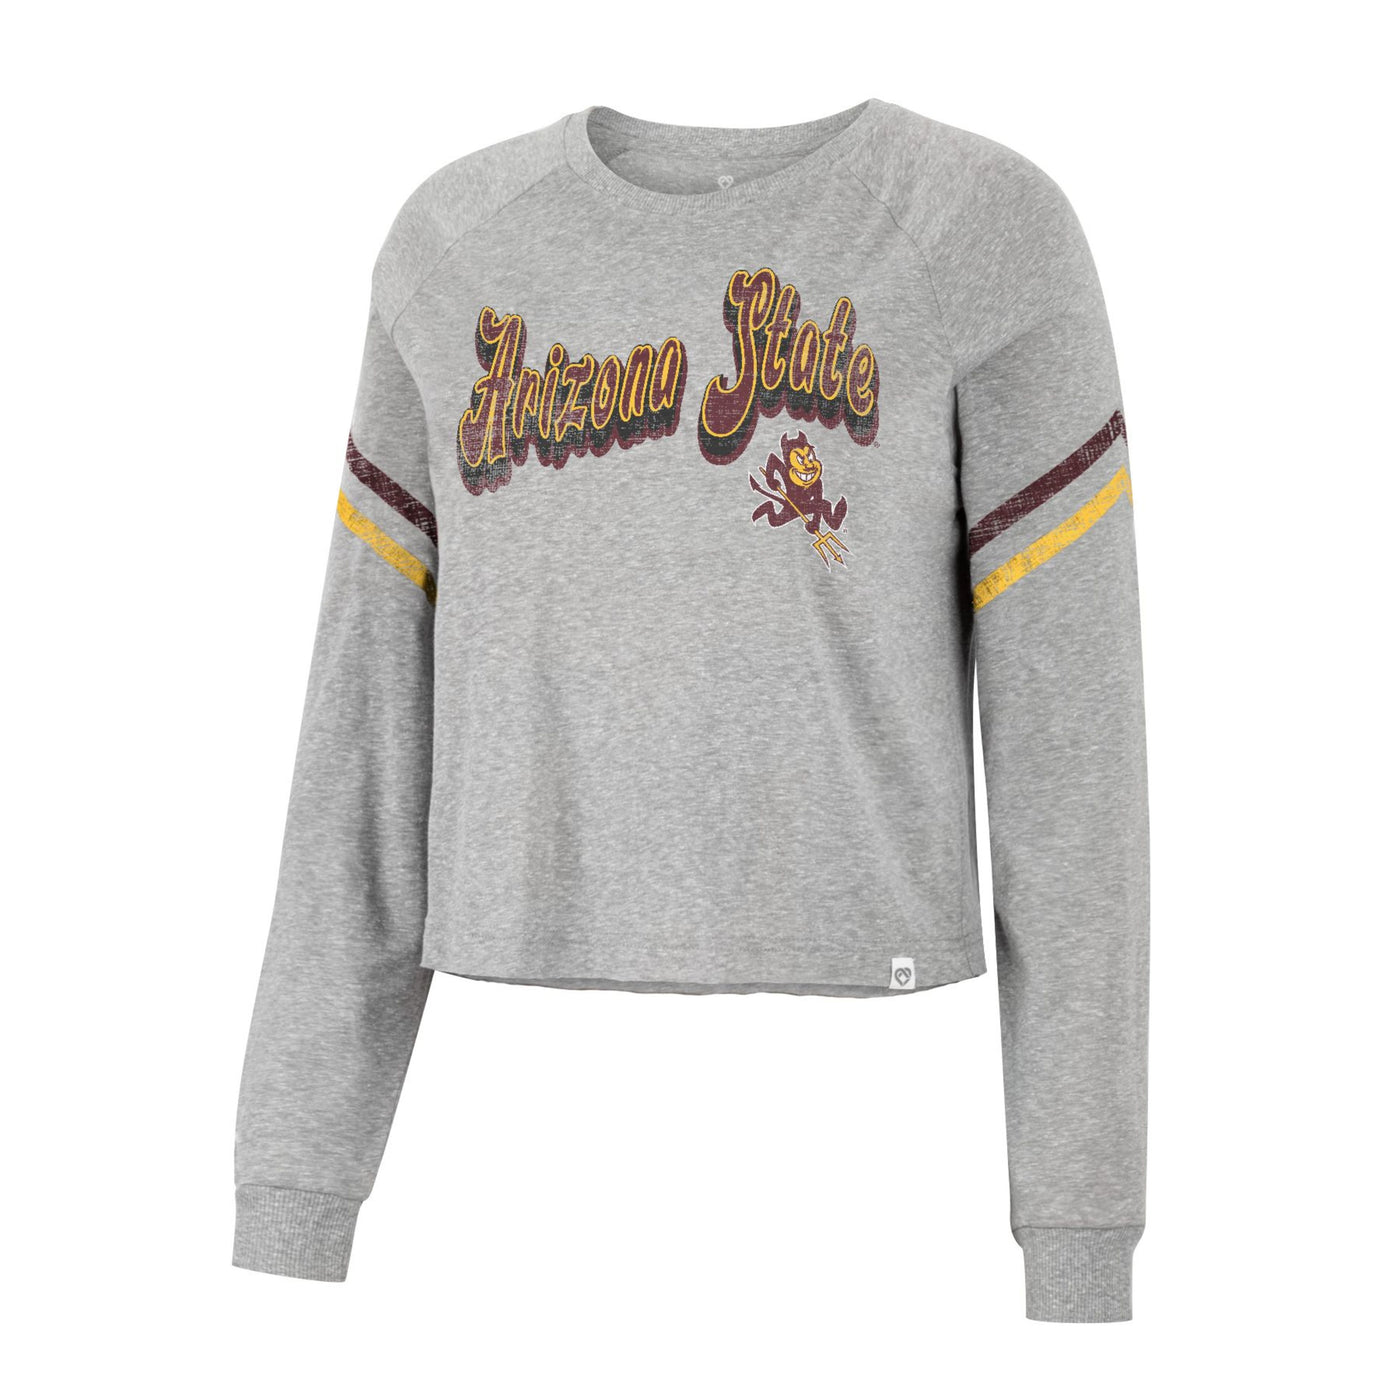 ASU grey cropped long sleeve. Features Arizona State text in maroon and gold in 70s like font. Also features a small sparky logo. 